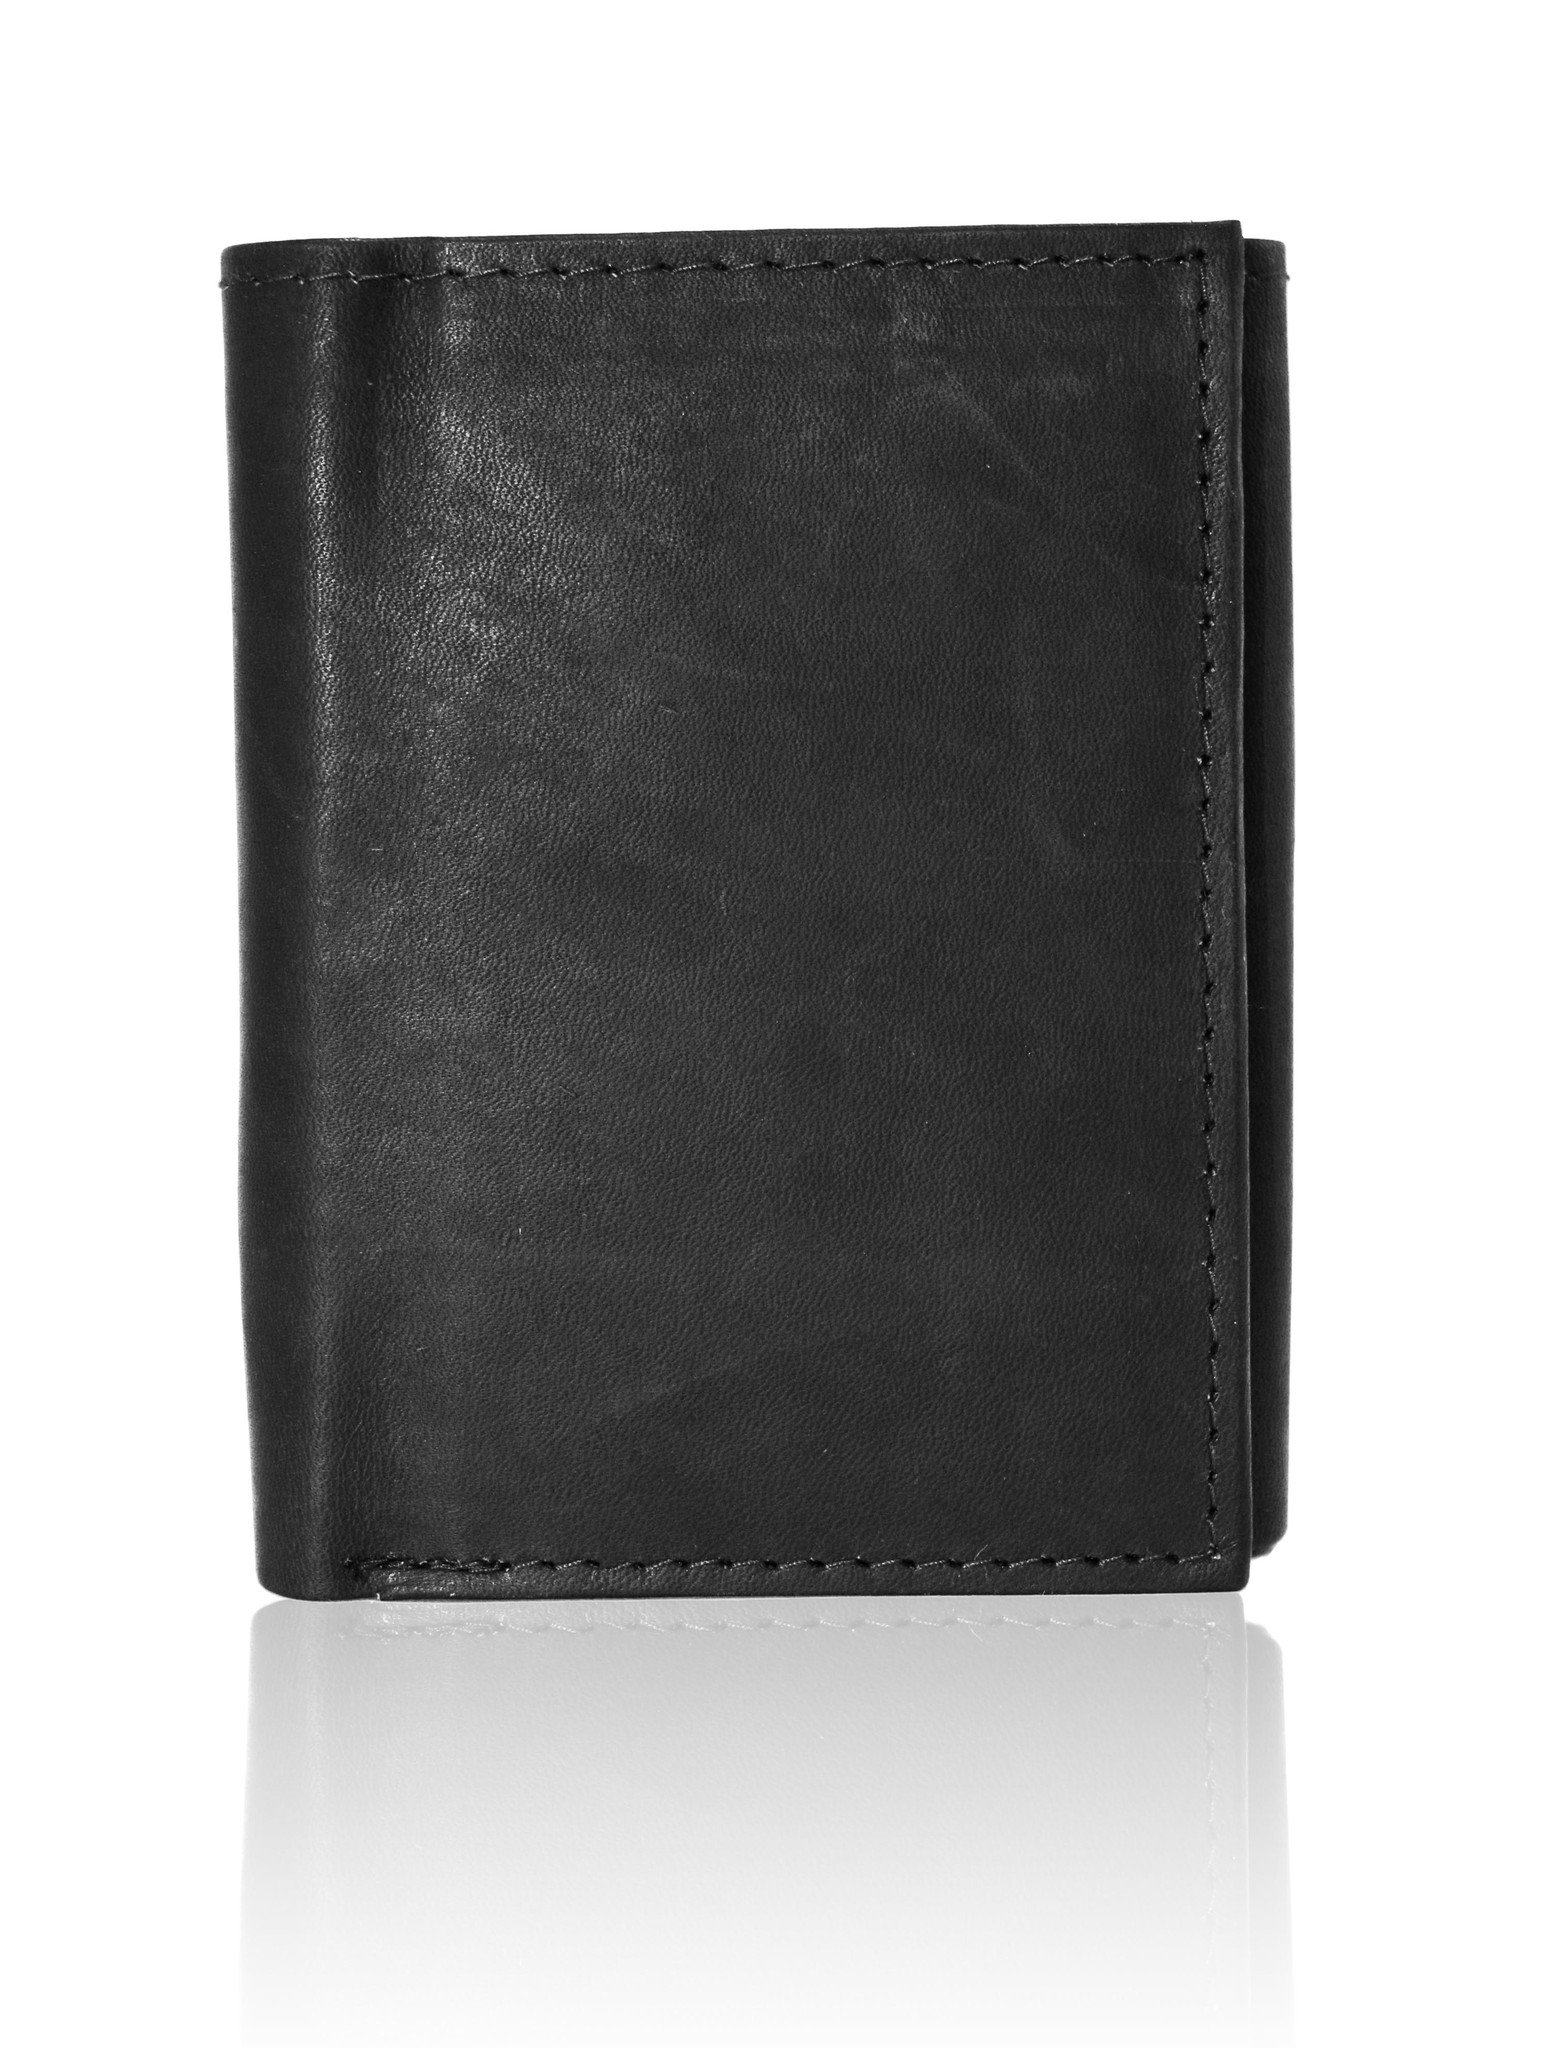 Women's Long Brown Pu Leather Wallet With Printed Letters, Trifold